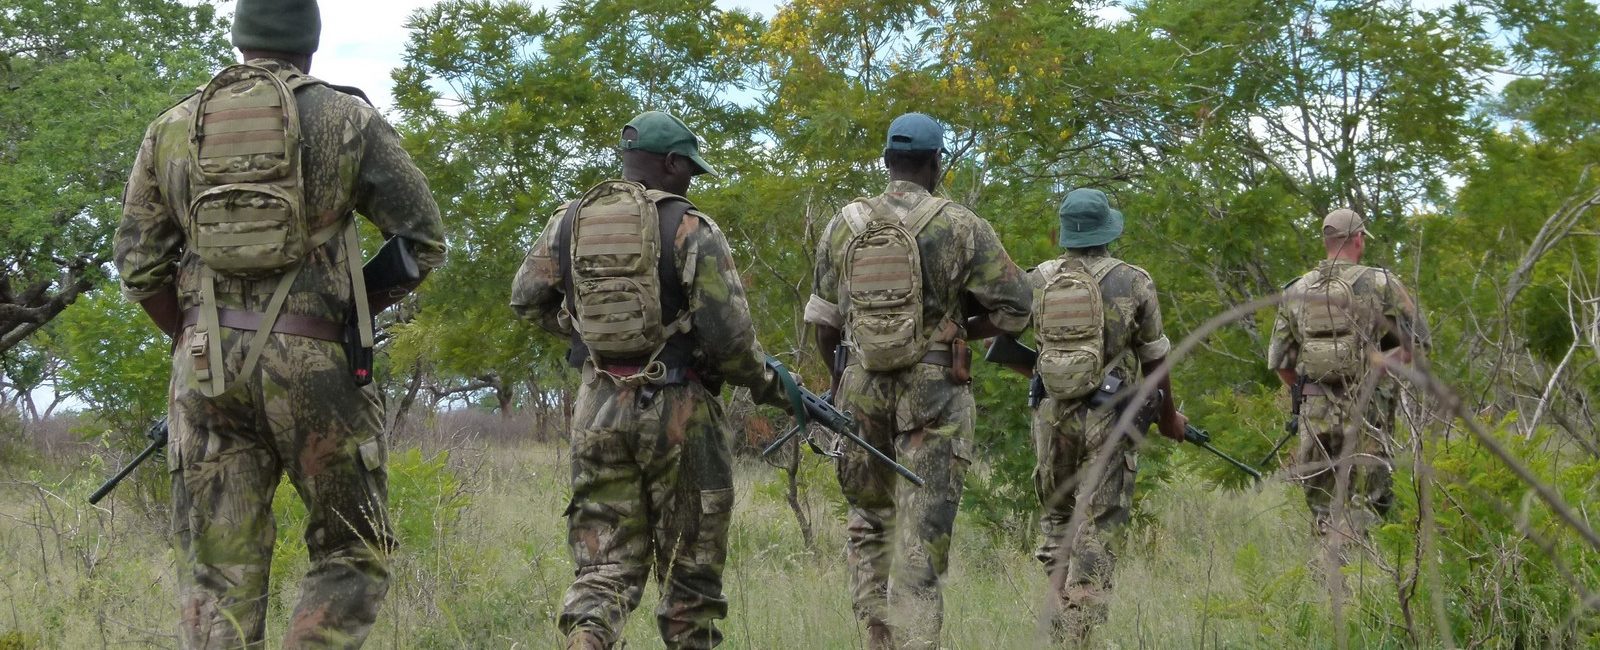 Image of rangers on patrol in uMkhuze Game Reserve in South Africa